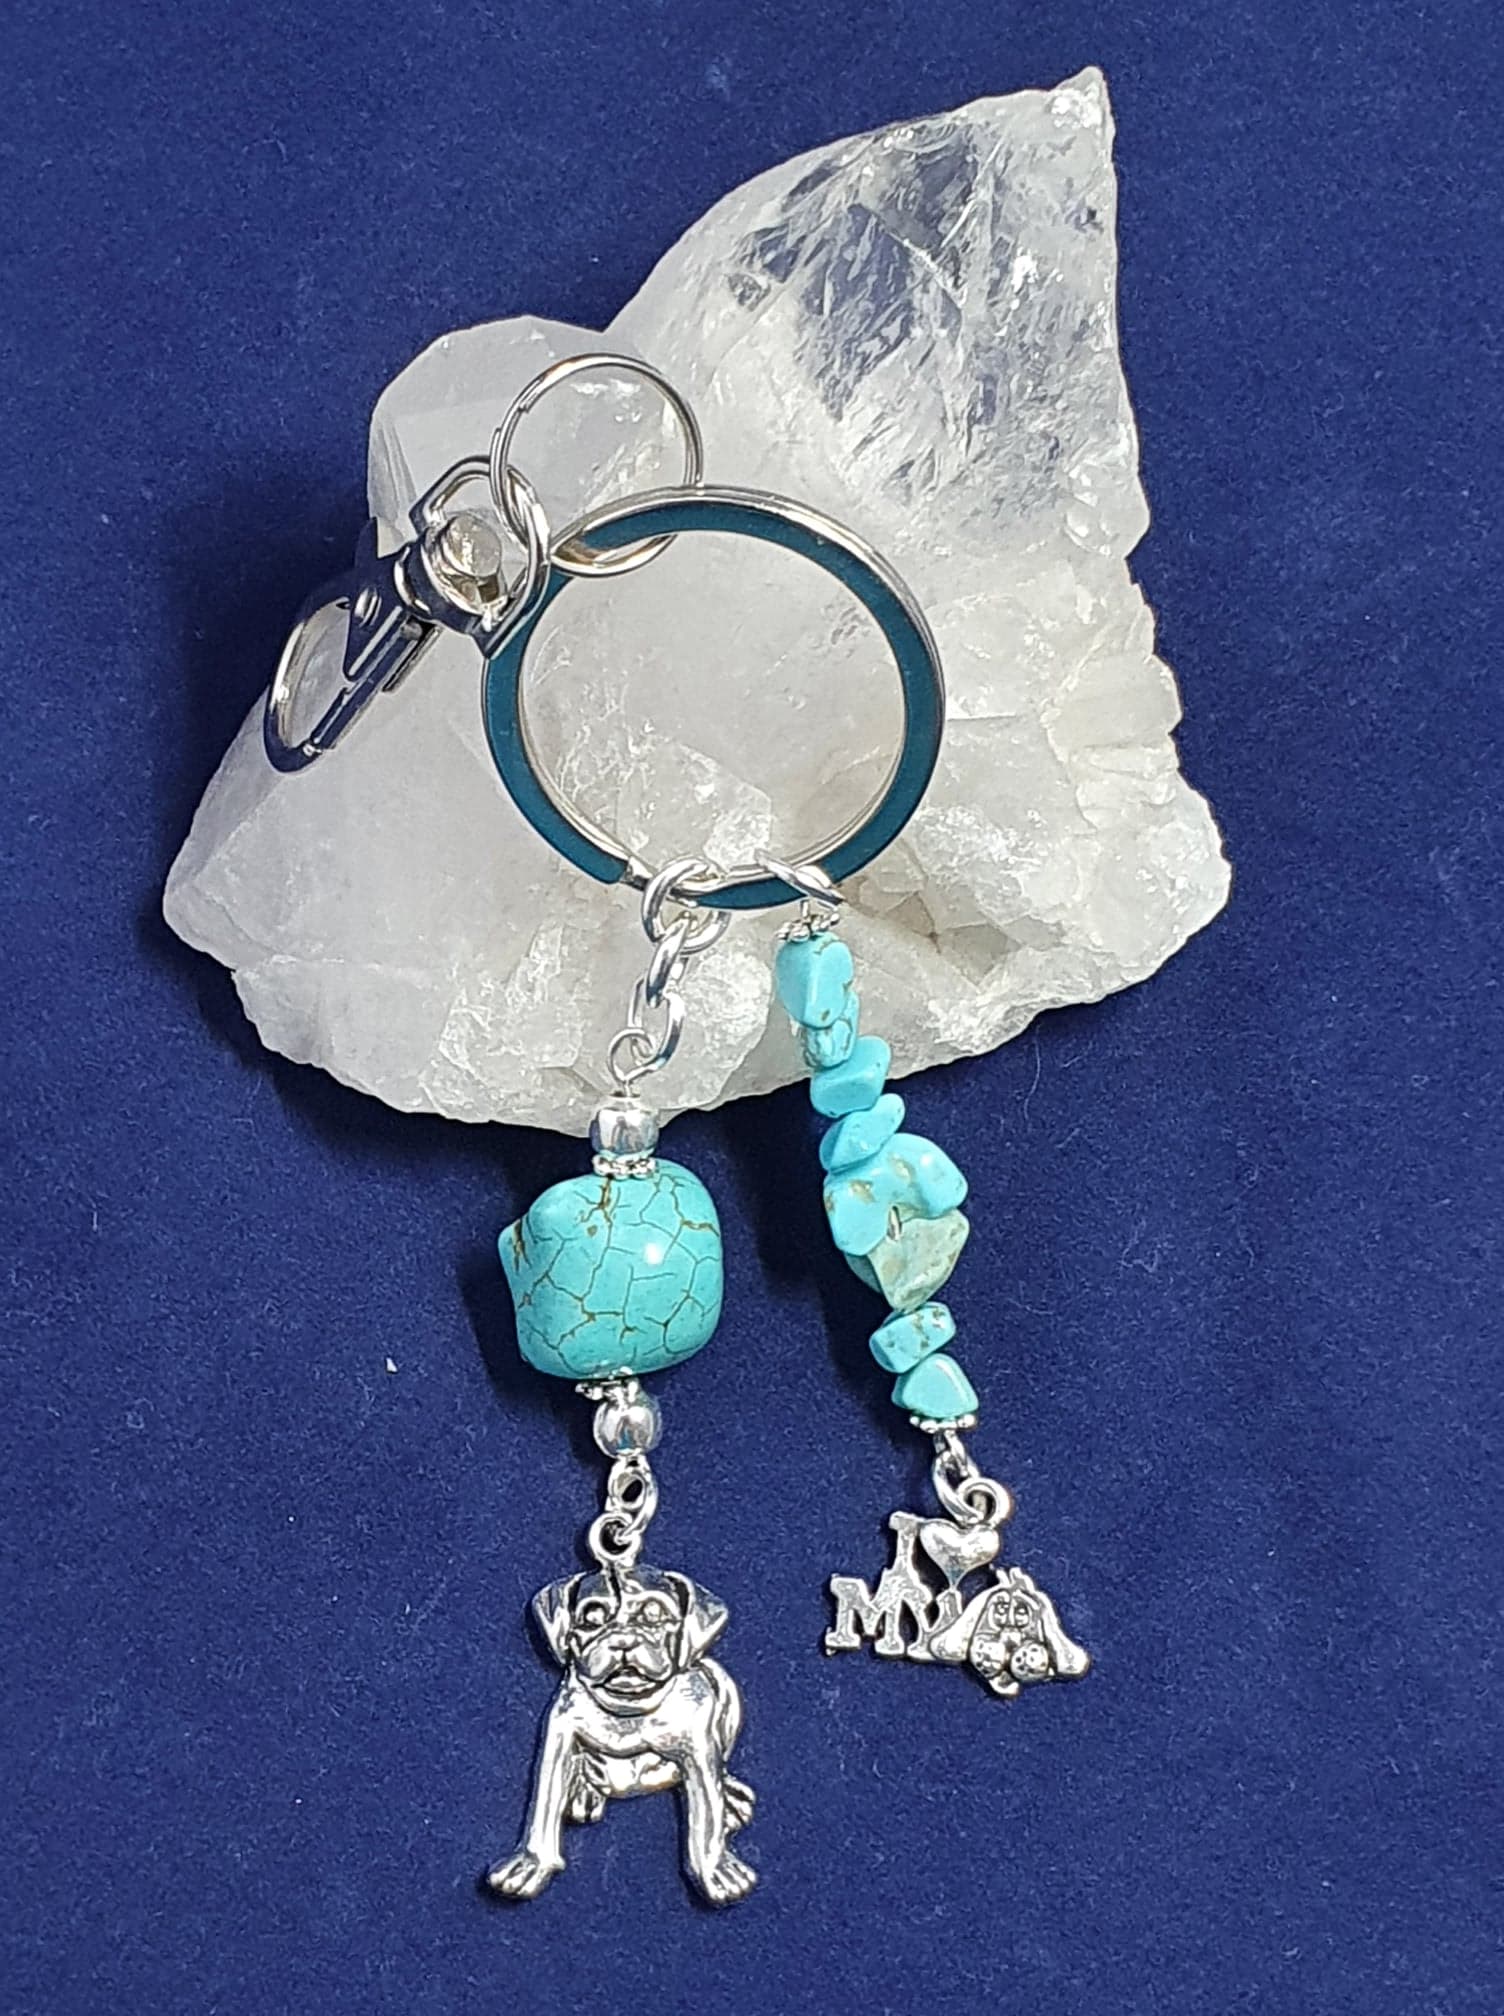 "I love my dog" theme Key Ring or Bag charm with . Turquoise crystal.